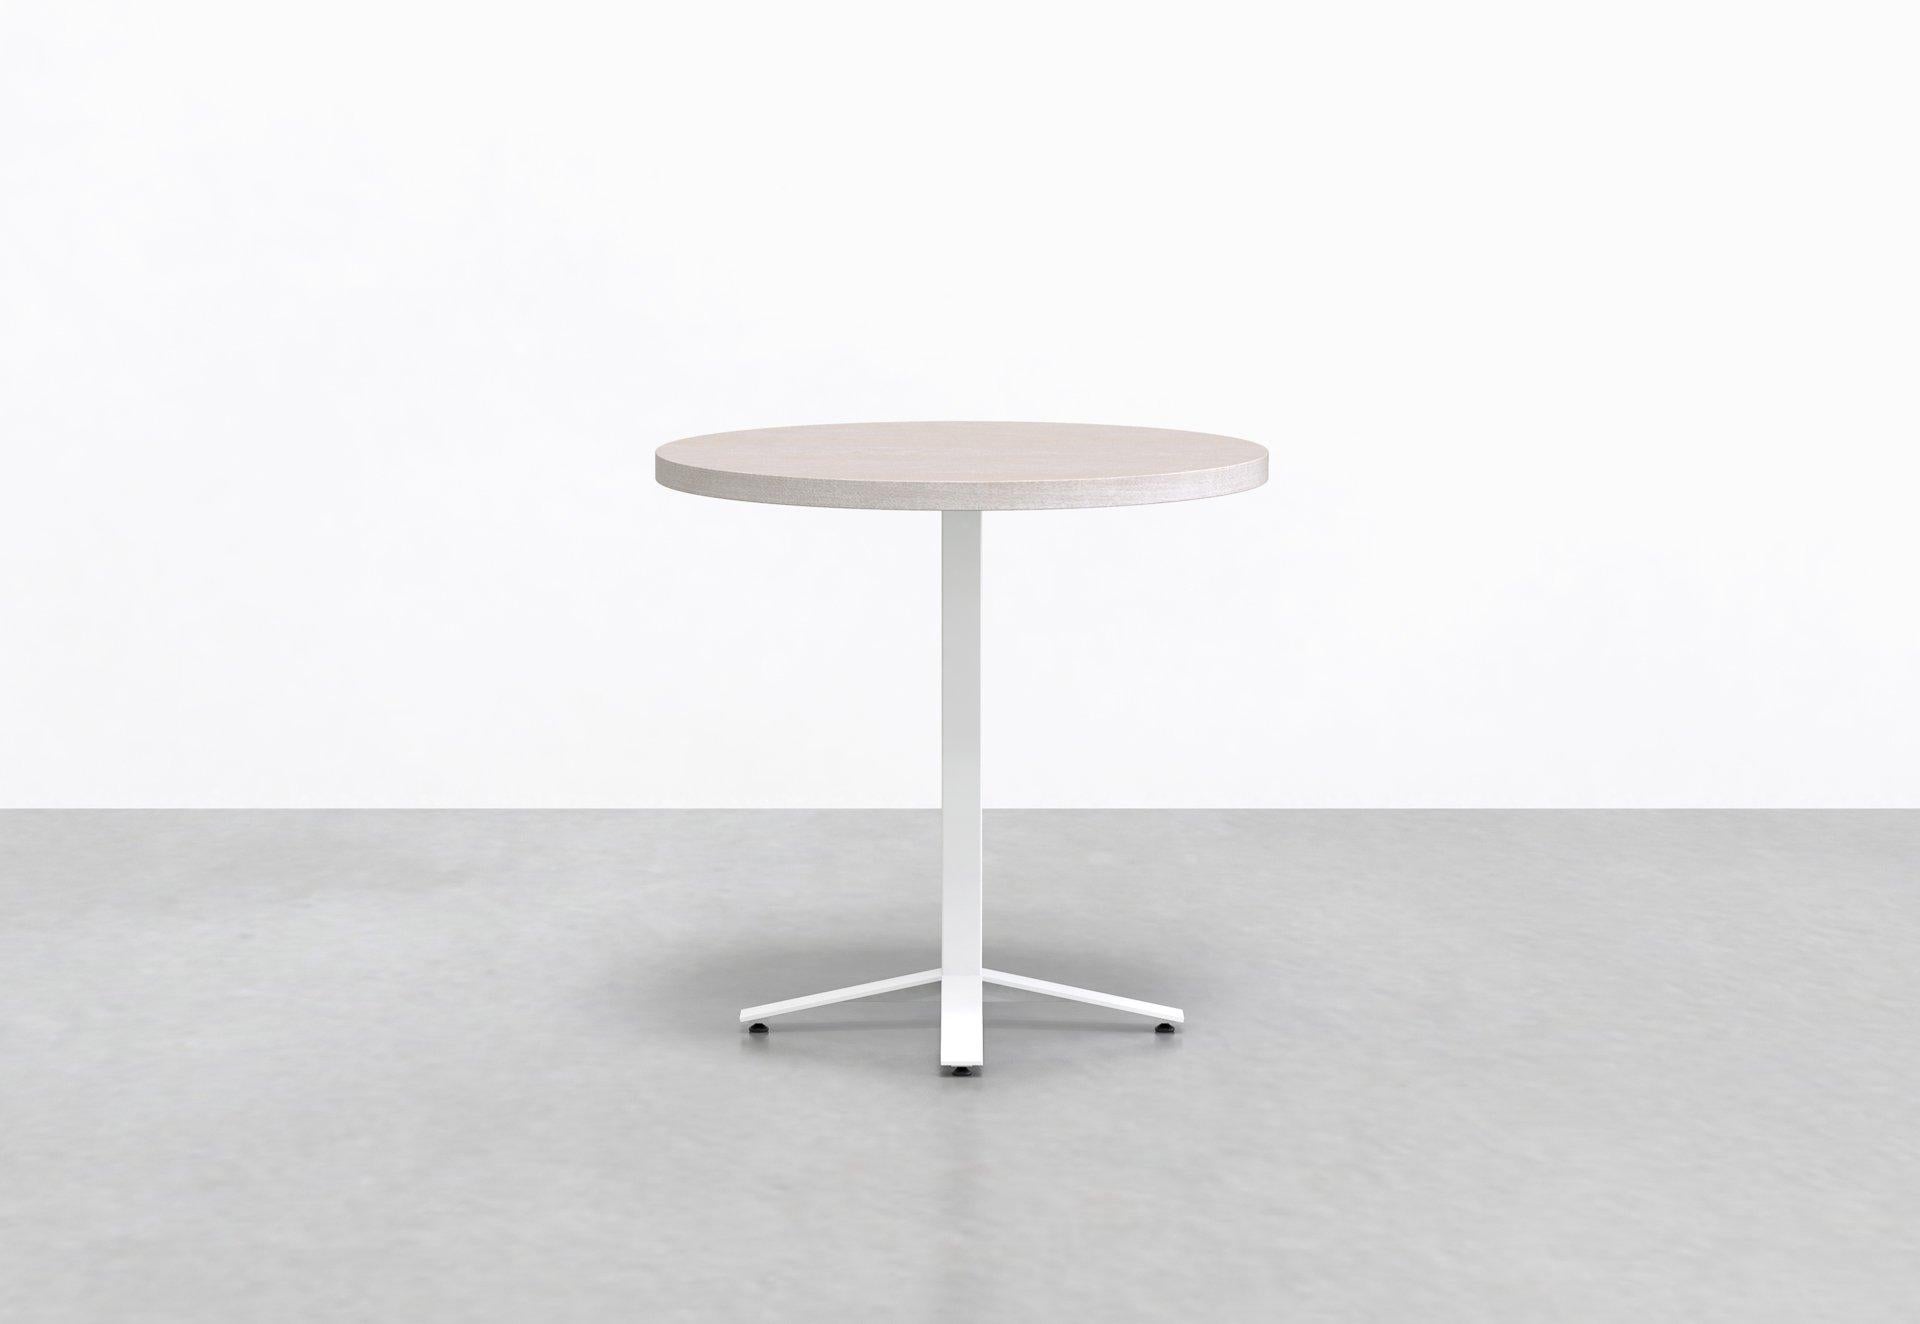 Sleek and sturdy, our Perch cafe tables are available with round or square tops, and easily fit into common and dining areas. The Perch is designed for high-traffic commercial use, and have been a favorite with many restaurant clients. Its four-foot